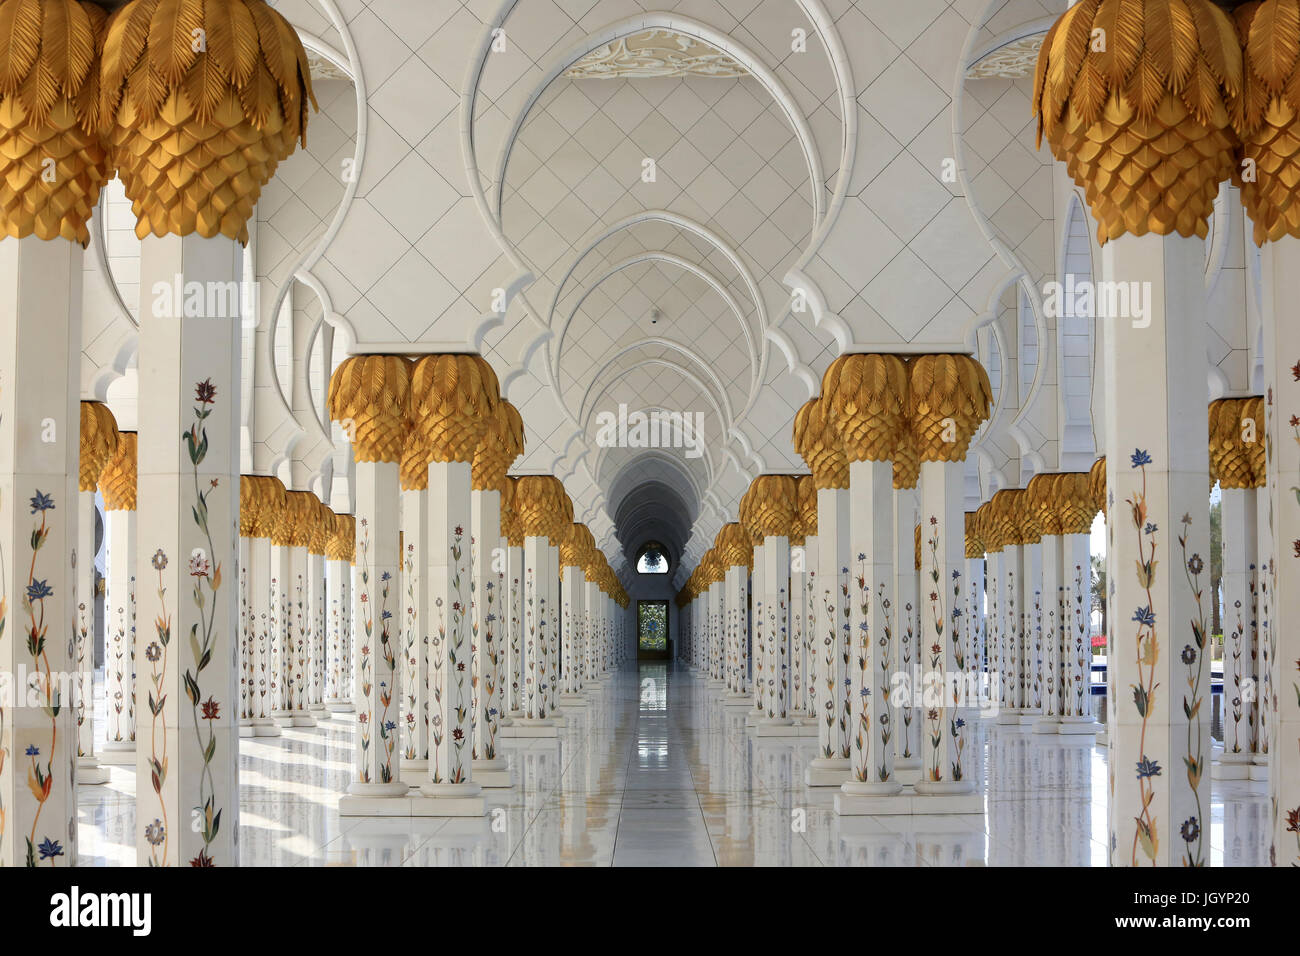 Arches surrounding central courtyard. Sheikh Zayed Mosque. 1995. Emirate of Abu Dhabi. Stock Photo